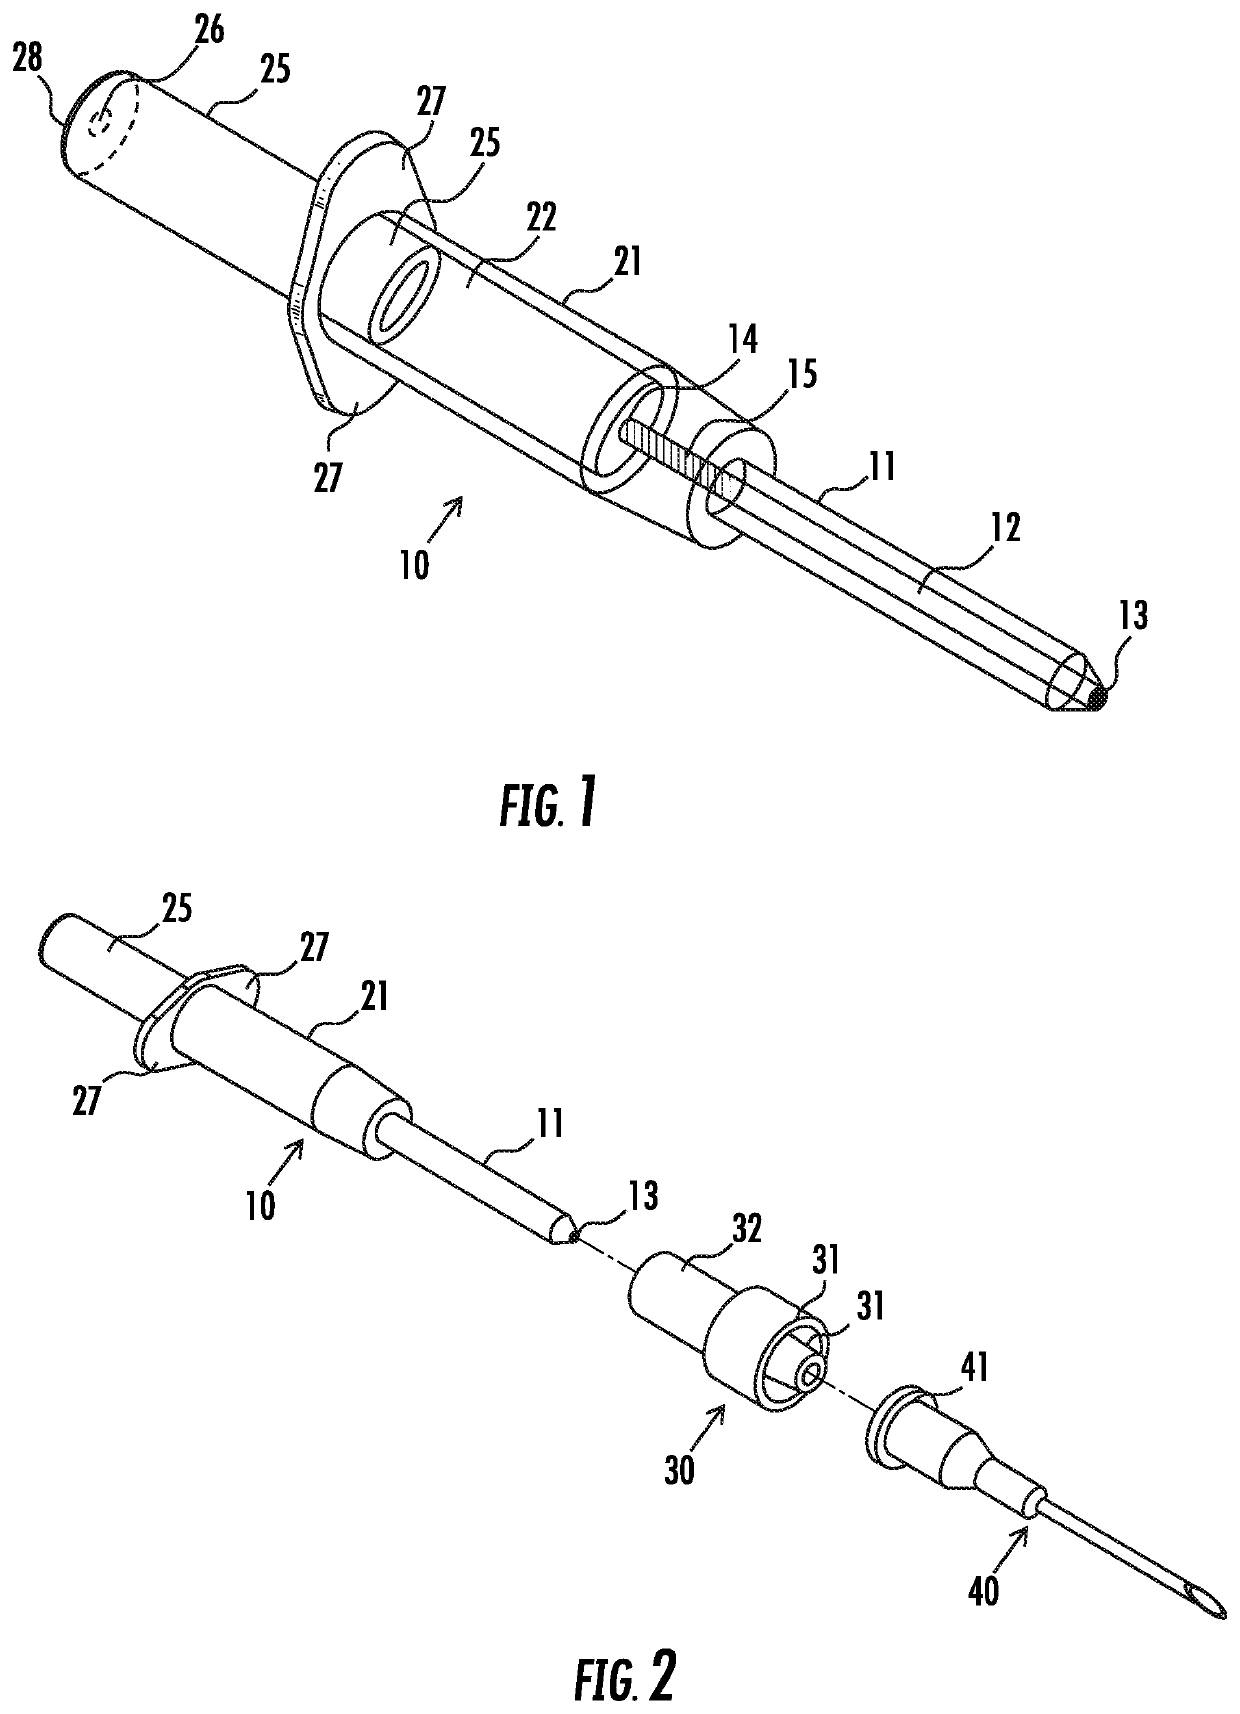 Apparatus for rapid collection of blood from livestock